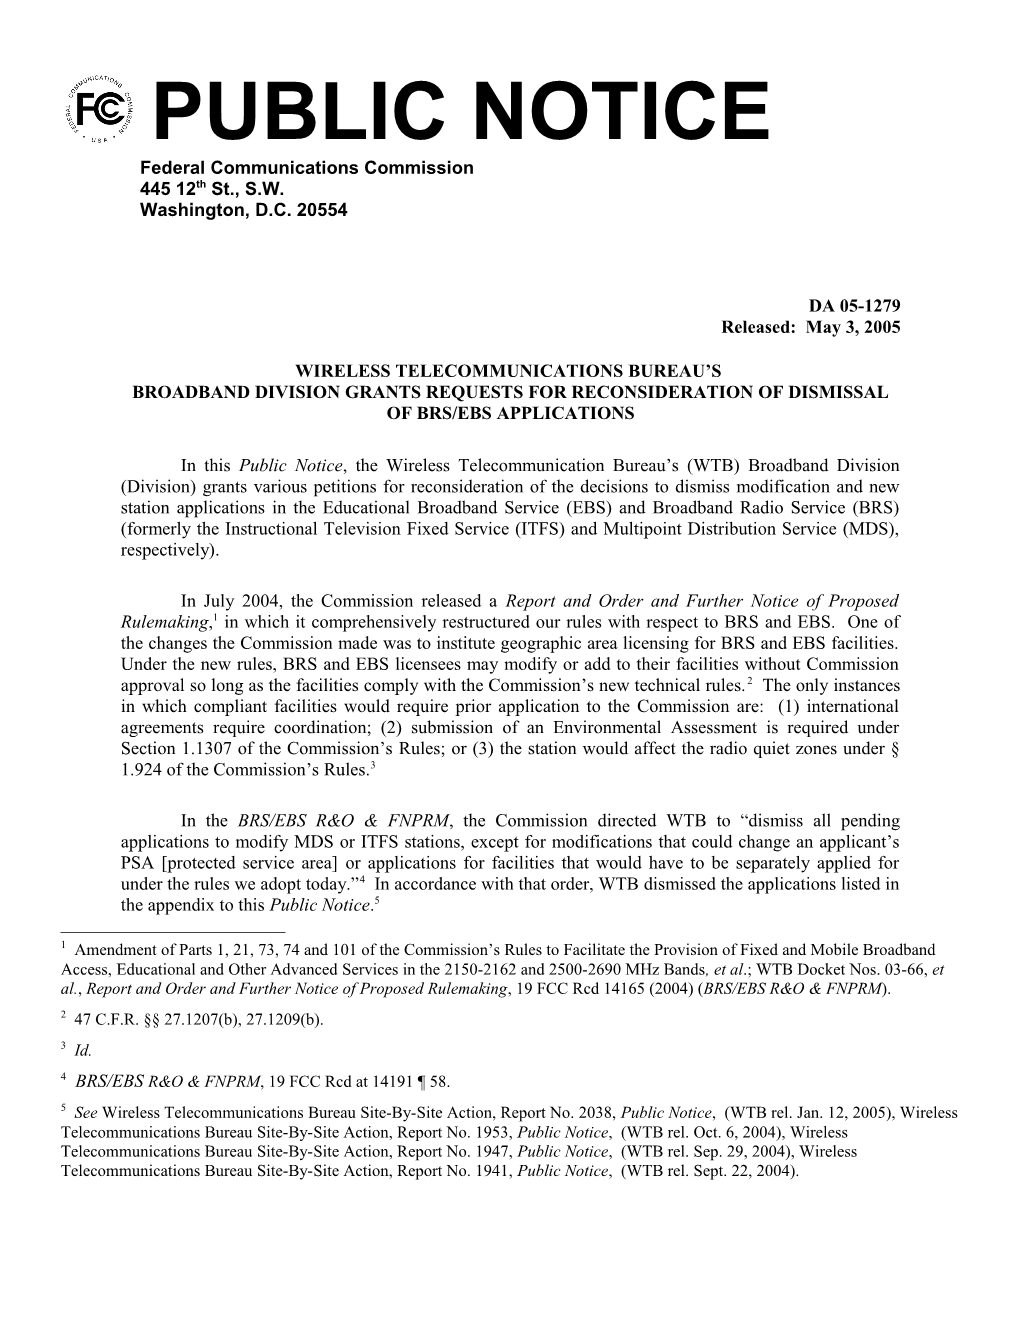 Broadband Division Grants Requests for Reconsideration of Dismissal of Brs/Ebs Applications